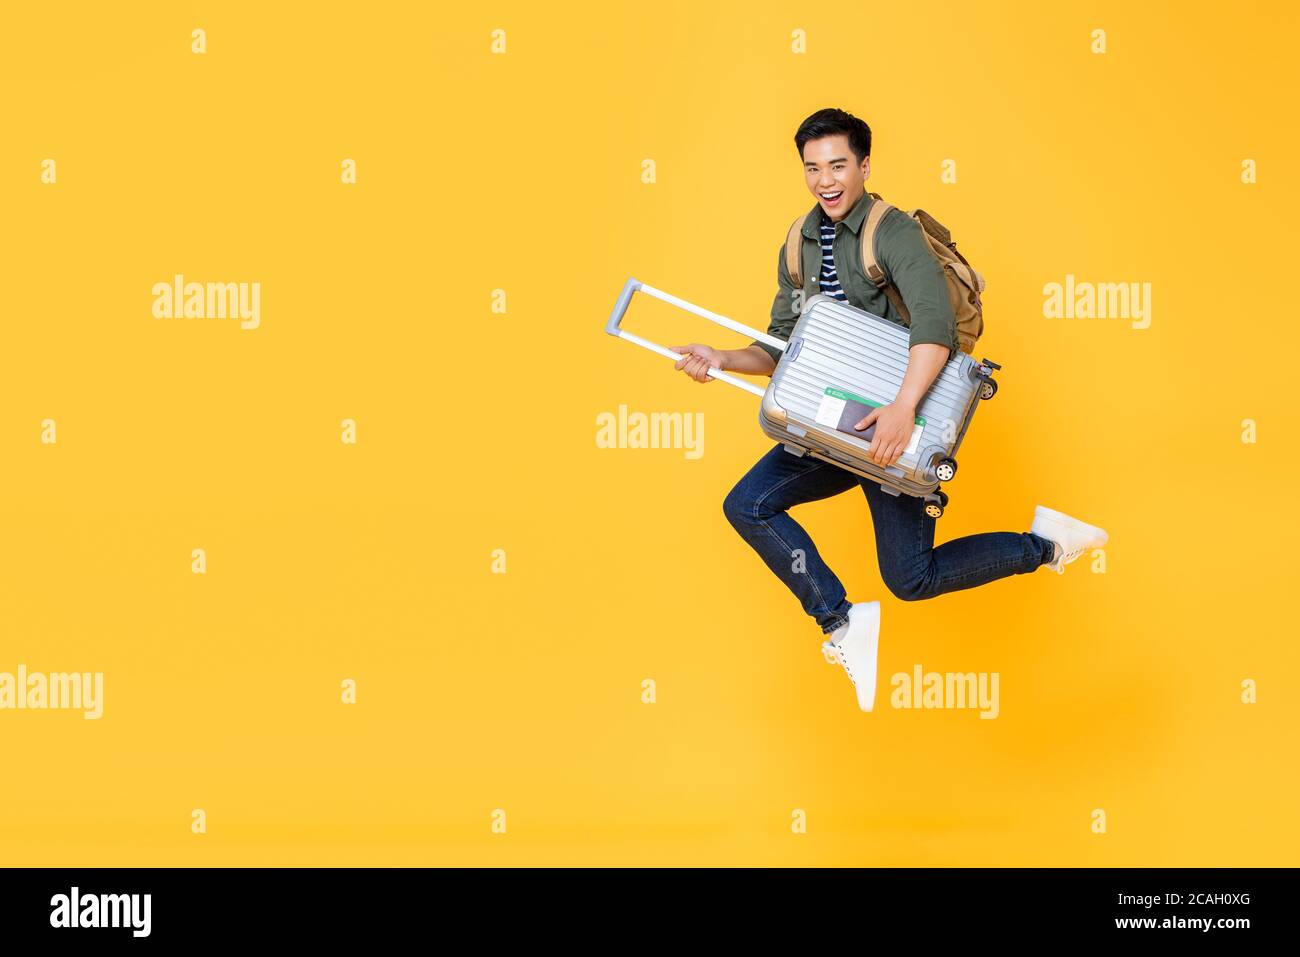 Young excited Asian tourist man with baggage jumping in mid-air ready to travel isolated on yellow background Stock Photo